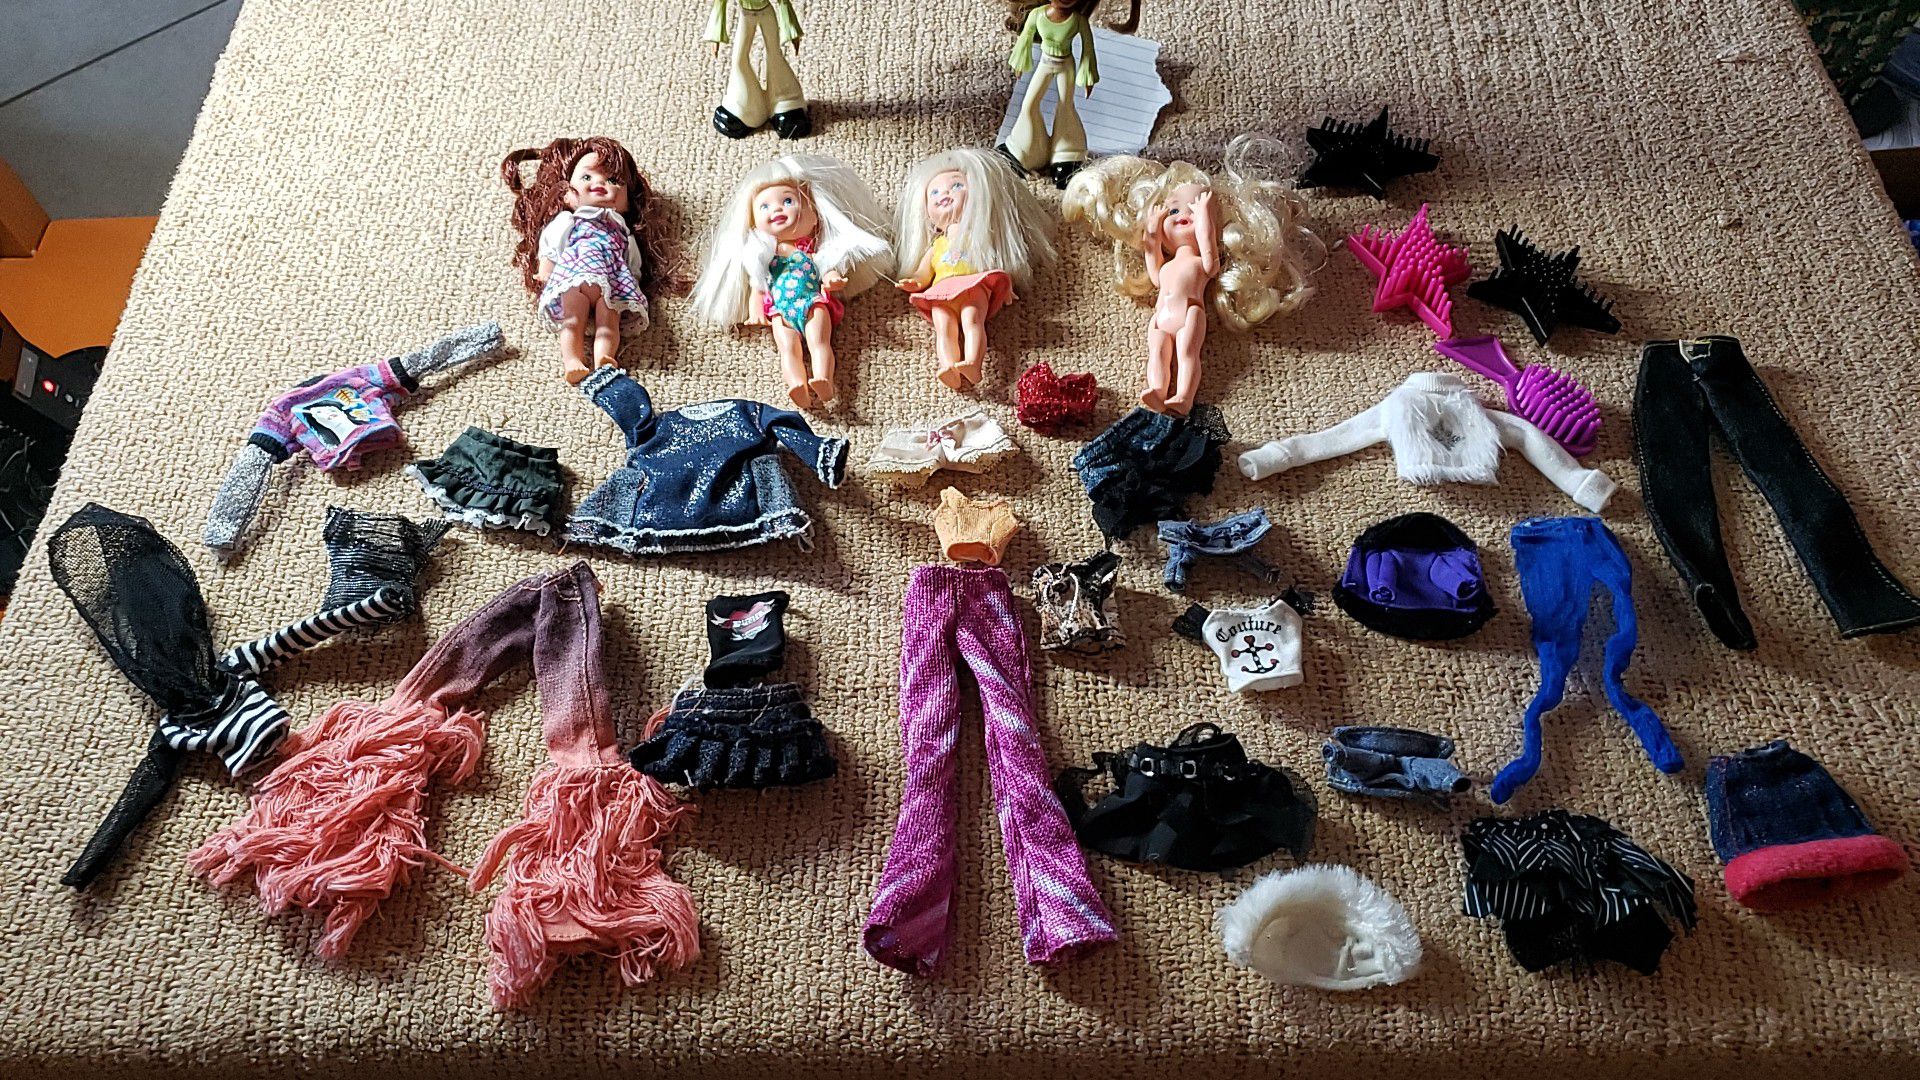 Bratz Dolls, and other small dolls, doll clothing &accessories